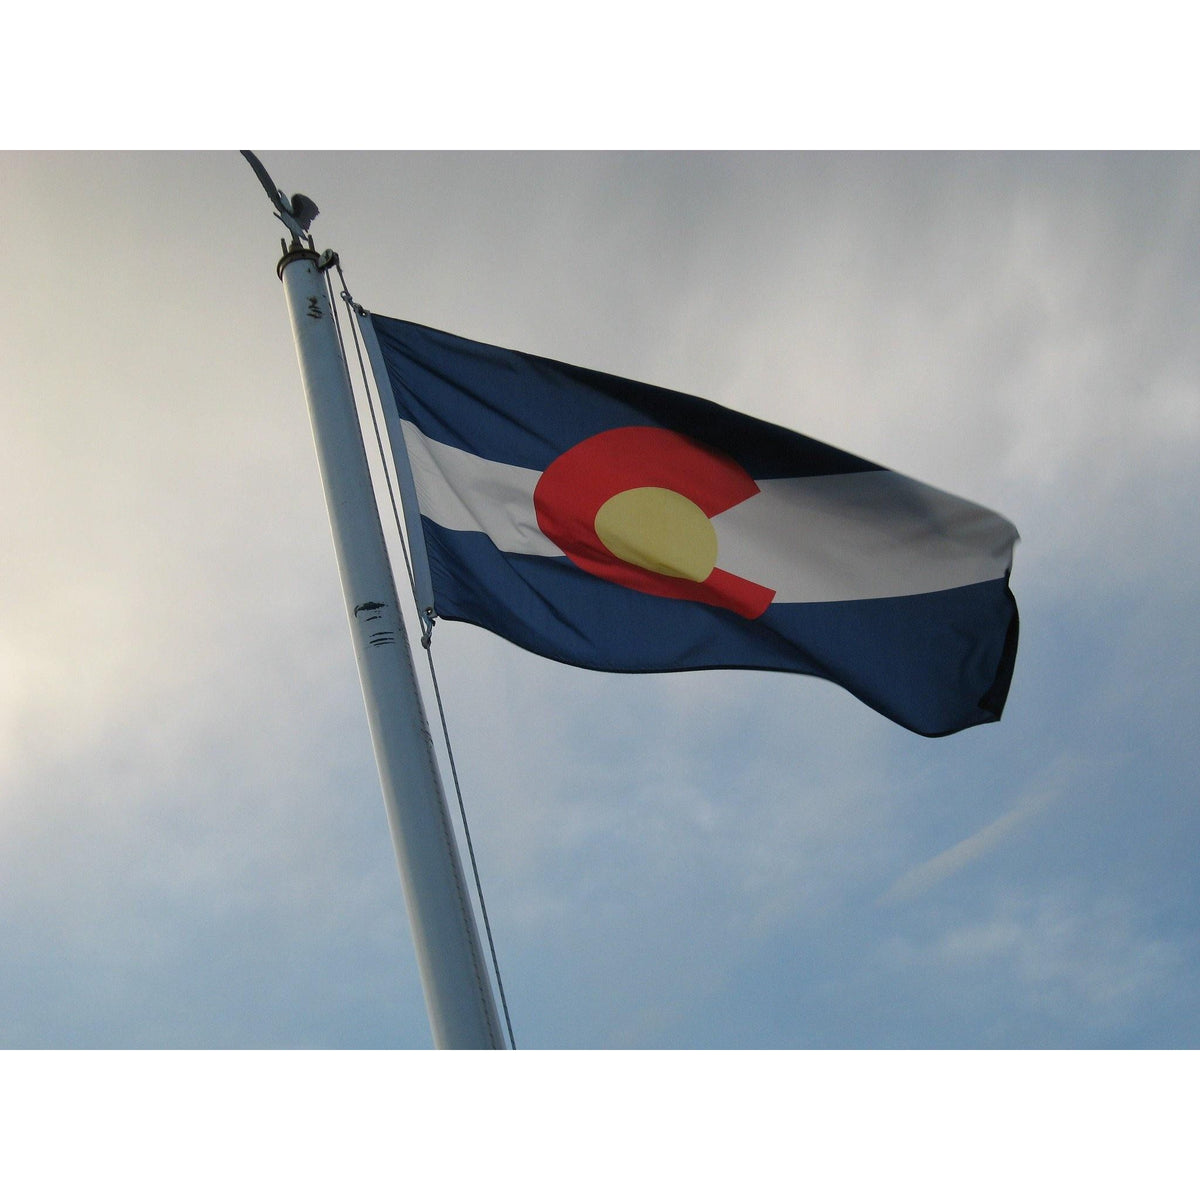 State of Colorado - The Custom Windsock Co.